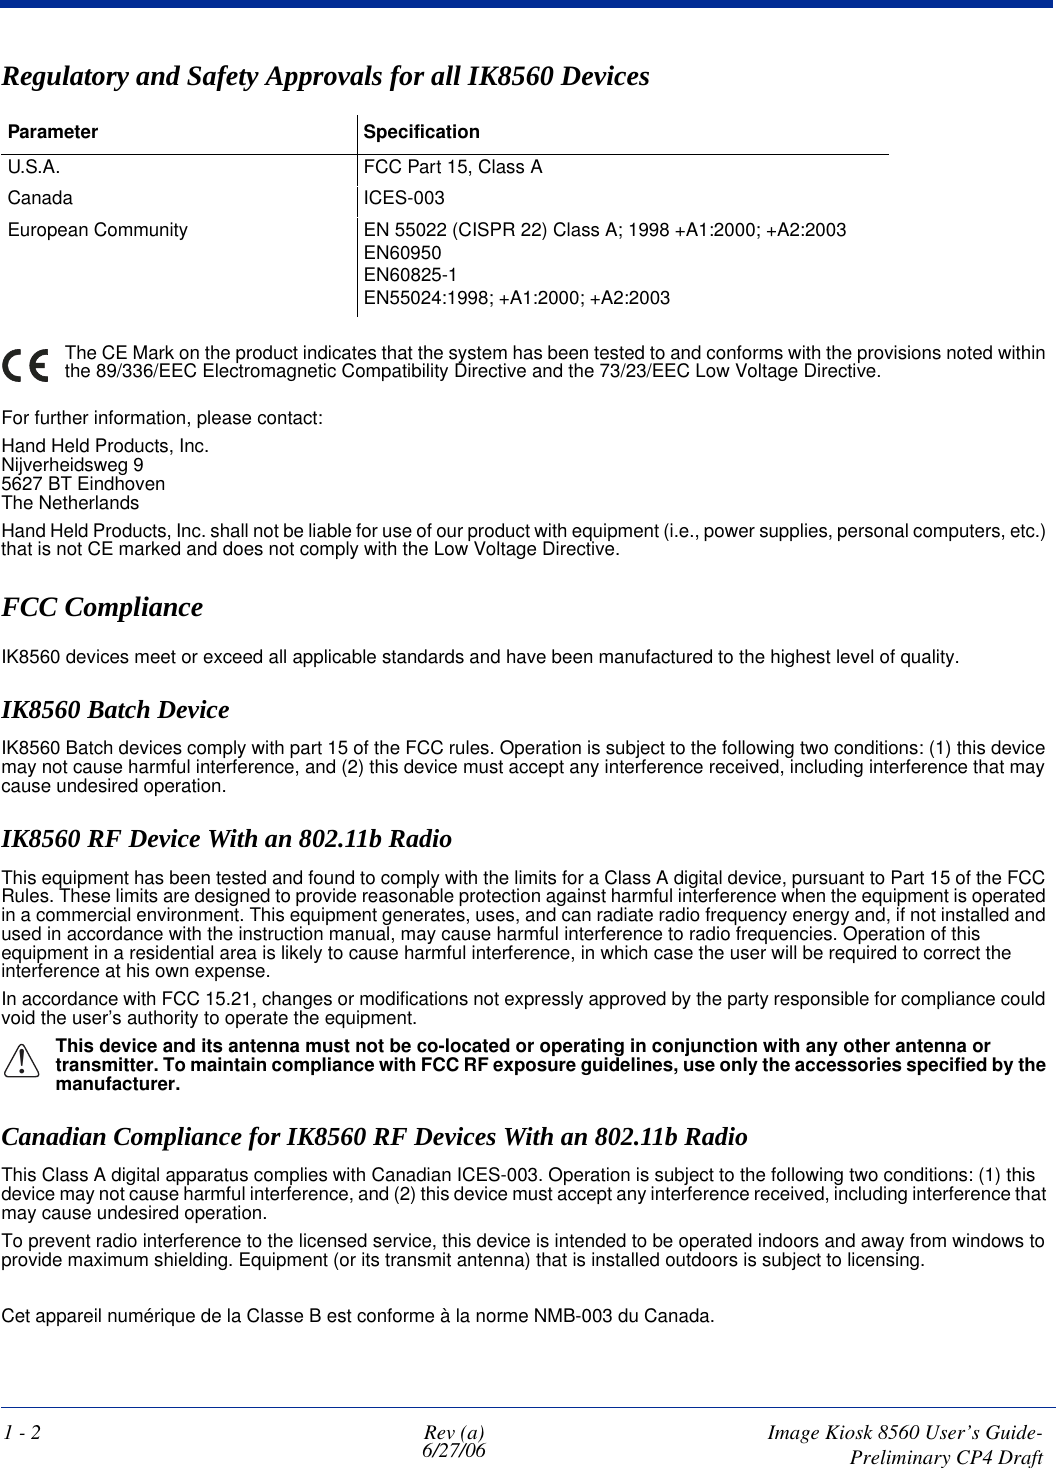 1 - 2 Rev (a)6/27/06 Image Kiosk 8560 User’s Guide- Preliminary CP4 DraftRegulatory and Safety Approvals for all IK8560 Devices Parameter SpecificationU.S.A. FCC Part 15, Class ACanada ICES-003European Community EN 55022 (CISPR 22) Class A; 1998 +A1:2000; +A2:2003EN60950EN60825-1EN55024:1998; +A1:2000; +A2:2003The CE Mark on the product indicates that the system has been tested to and conforms with the provisions noted within the 89/336/EEC Electromagnetic Compatibility Directive and the 73/23/EEC Low Voltage Directive. For further information, please contact:Hand Held Products, Inc.Nijverheidsweg 95627 BT EindhovenThe NetherlandsHand Held Products, Inc. shall not be liable for use of our product with equipment (i.e., power supplies, personal computers, etc.) that is not CE marked and does not comply with the Low Voltage Directive.FCC Compliance IK8560 devices meet or exceed all applicable standards and have been manufactured to the highest level of quality. IK8560 Batch DeviceIK8560 Batch devices comply with part 15 of the FCC rules. Operation is subject to the following two conditions: (1) this device may not cause harmful interference, and (2) this device must accept any interference received, including interference that may cause undesired operation.IK8560 RF Device With an 802.11b Radio This equipment has been tested and found to comply with the limits for a Class A digital device, pursuant to Part 15 of the FCC Rules. These limits are designed to provide reasonable protection against harmful interference when the equipment is operated in a commercial environment. This equipment generates, uses, and can radiate radio frequency energy and, if not installed and used in accordance with the instruction manual, may cause harmful interference to radio frequencies. Operation of this equipment in a residential area is likely to cause harmful interference, in which case the user will be required to correct the interference at his own expense.In accordance with FCC 15.21, changes or modifications not expressly approved by the party responsible for compliance could void the user’s authority to operate the equipment.!This device and its antenna must not be co-located or operating in conjunction with any other antenna or transmitter. To maintain compliance with FCC RF exposure guidelines, use only the accessories specified by the manufacturer.Canadian Compliance for IK8560 RF Devices With an 802.11b RadioThis Class A digital apparatus complies with Canadian ICES-003. Operation is subject to the following two conditions: (1) this device may not cause harmful interference, and (2) this device must accept any interference received, including interference that may cause undesired operation. To prevent radio interference to the licensed service, this device is intended to be operated indoors and away from windows to provide maximum shielding. Equipment (or its transmit antenna) that is installed outdoors is subject to licensing.Cet appareil numérique de la Classe B est conforme à la norme NMB-003 du Canada.